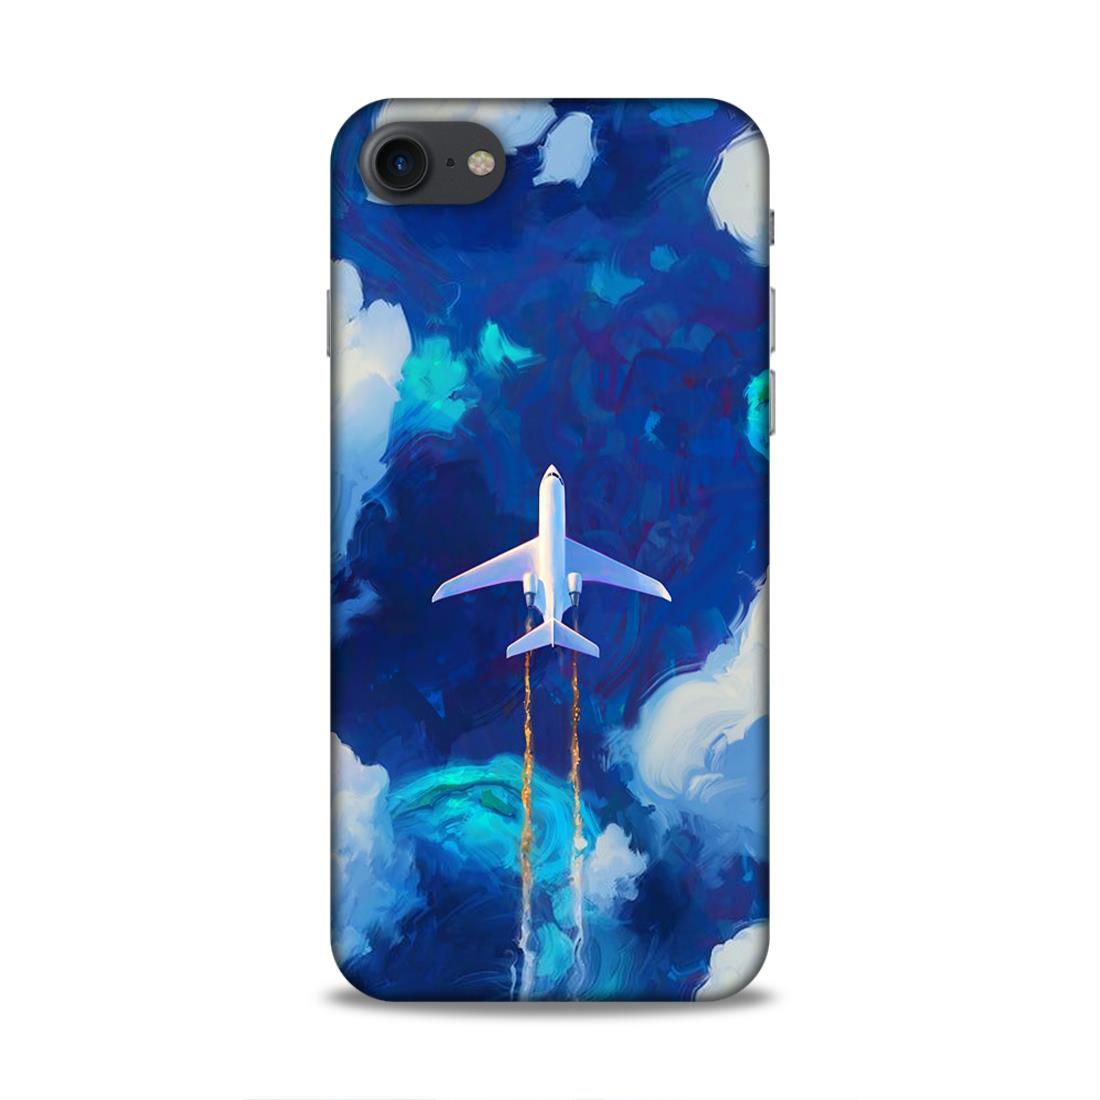 Aeroplane In The Sky Hard Back Case For Apple iPhone 7 / 8 / SE 2020